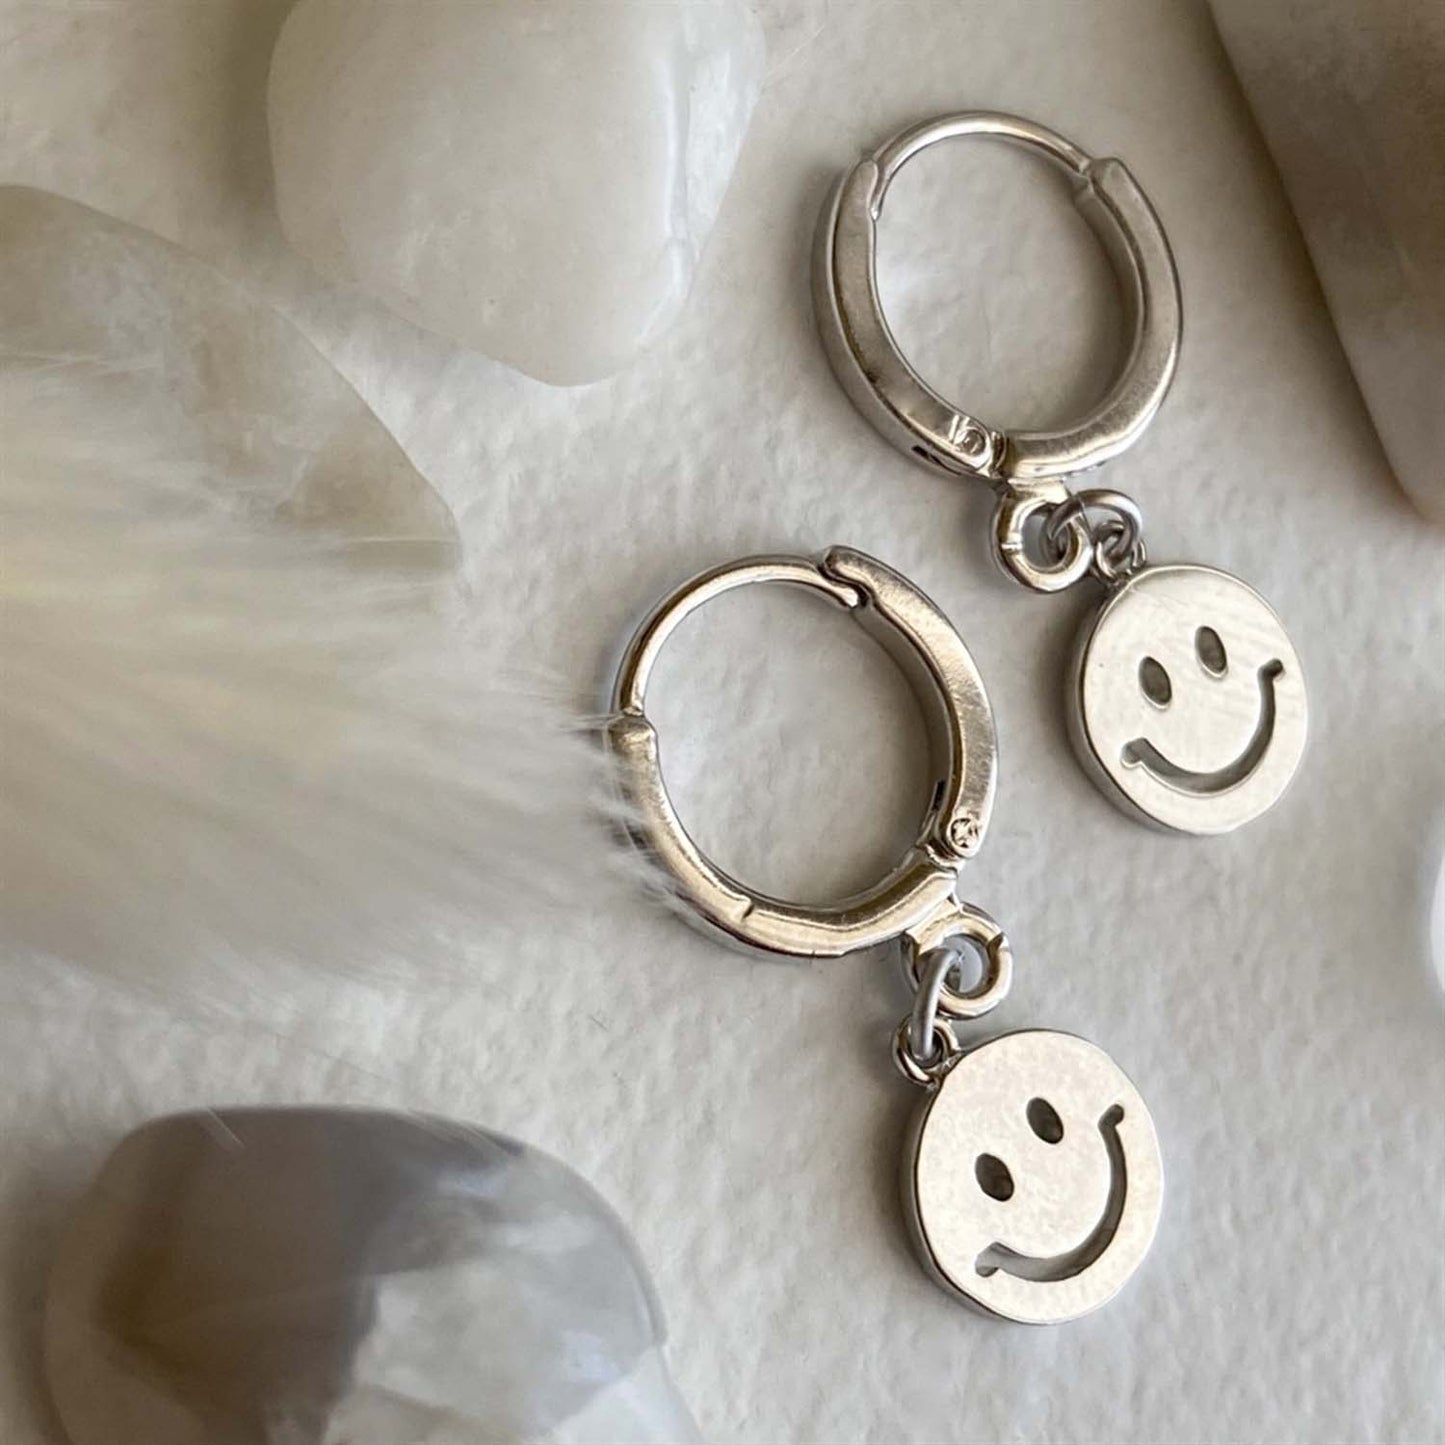 Have A Nice Day Smiley Face Hugger Hoop Earrings in Silver